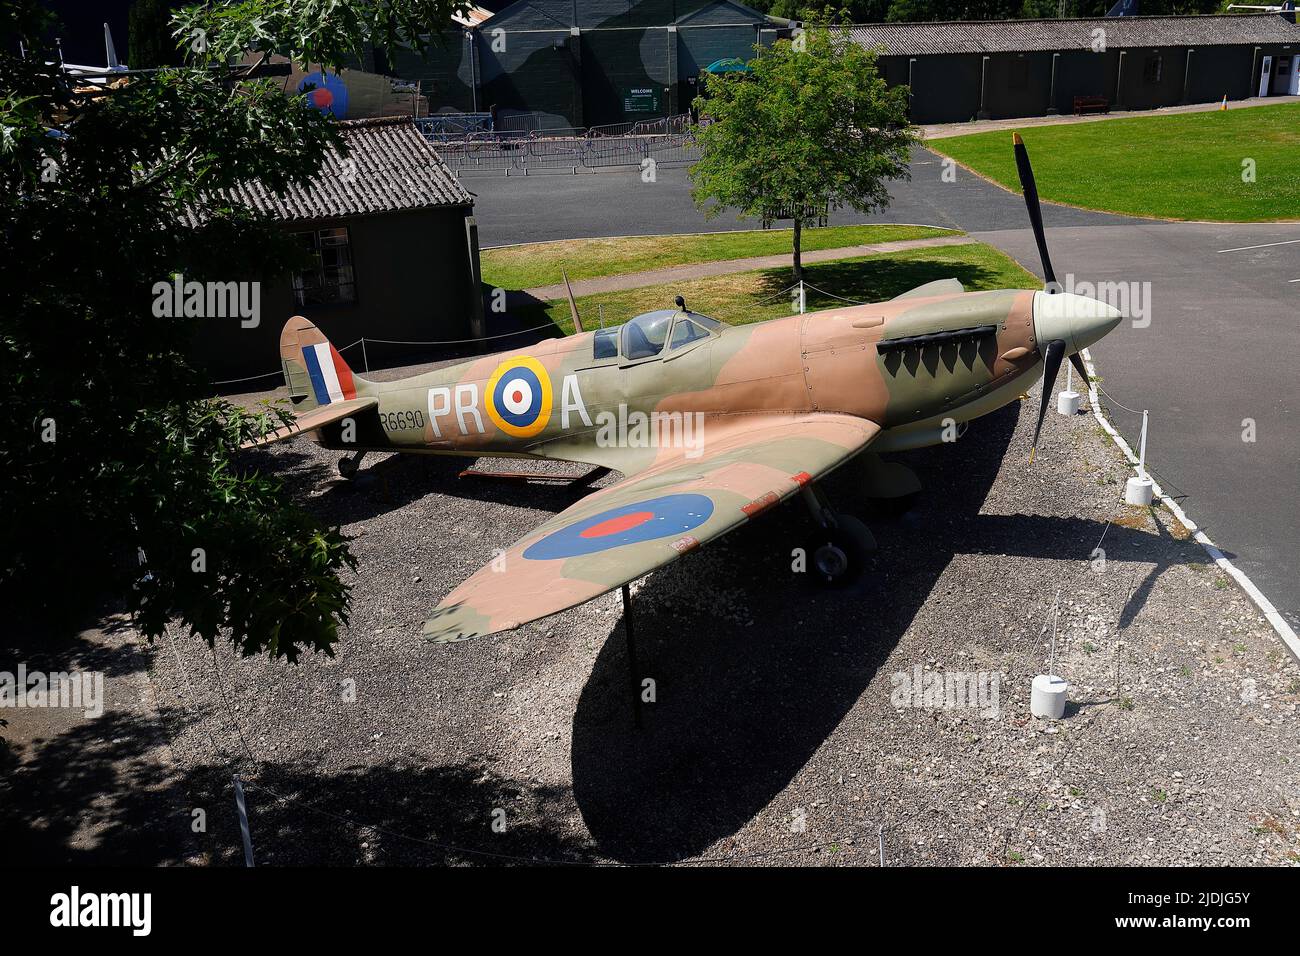 A preserved Supermarine Spitfire R6690 museum exhibit at Yorkshire Air Museum in Elvington,North Yorkshire Stock Photo